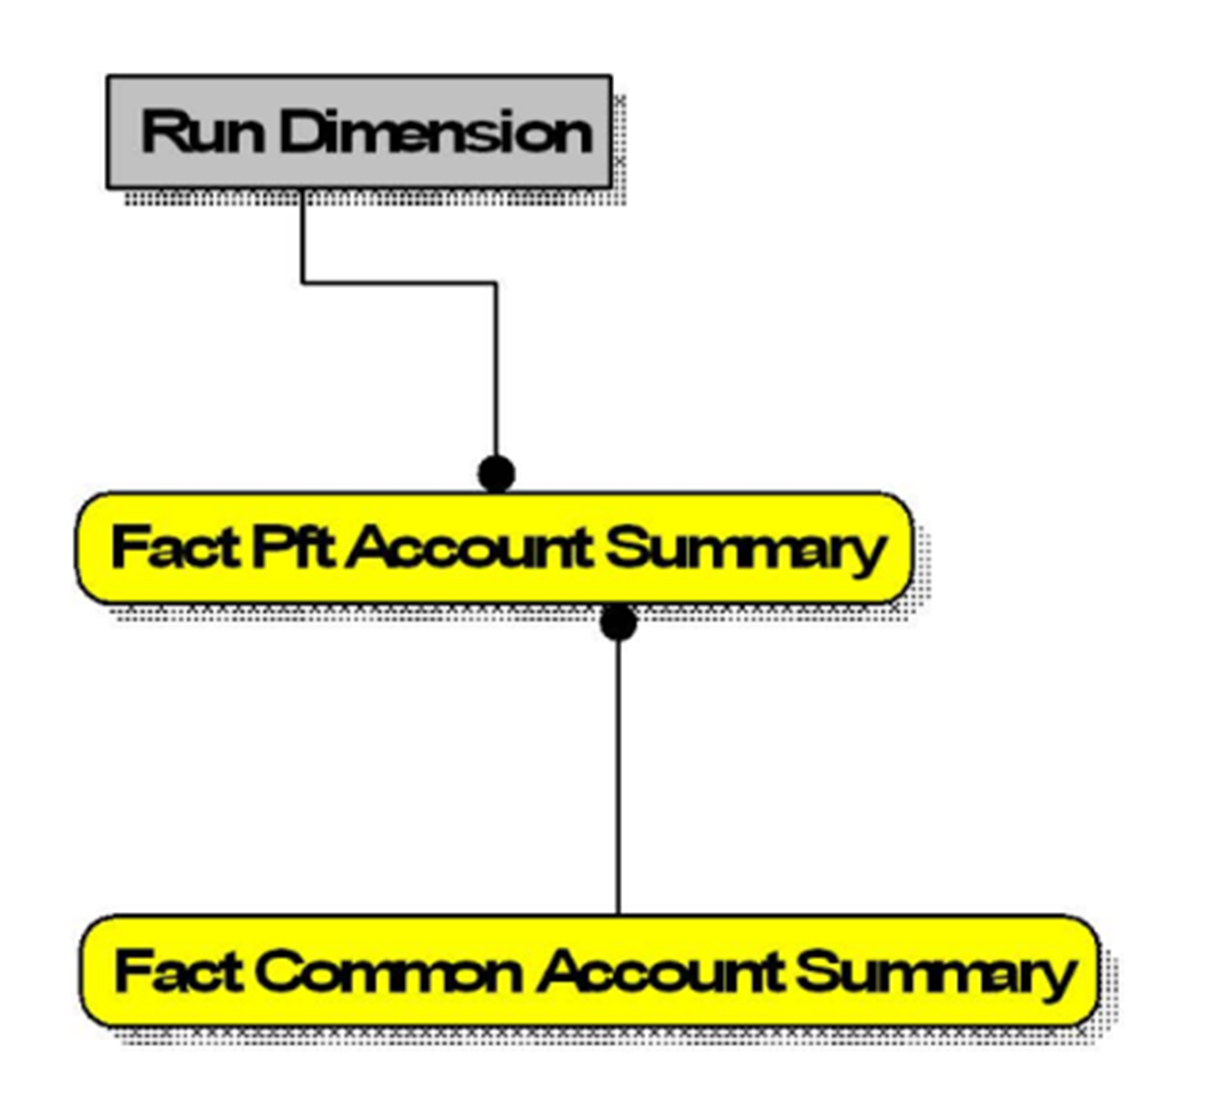 This illustration depicts the Profitability Management (PFT) Account Summary.